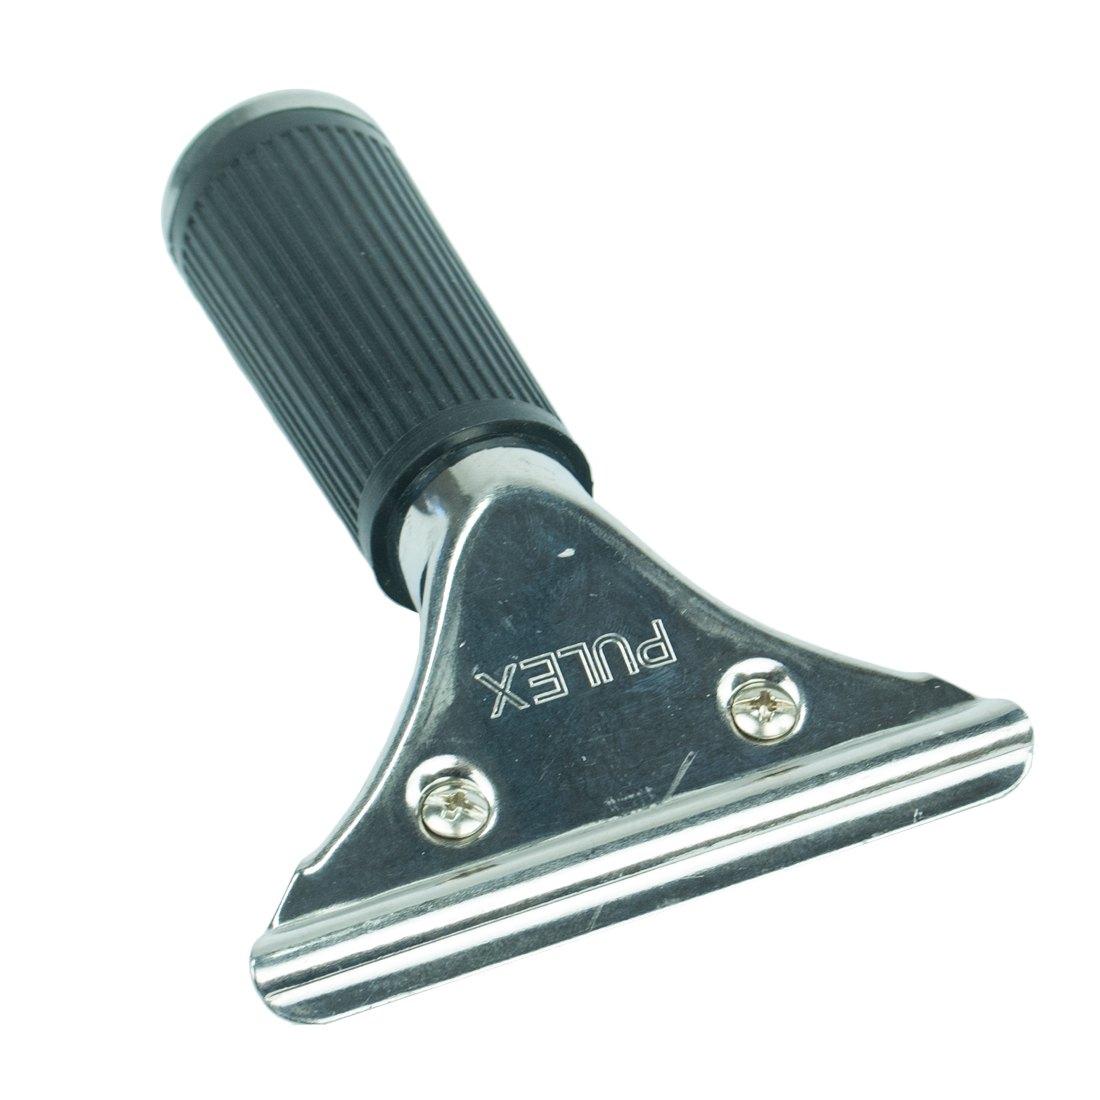 Pulex Stainless Steel Squeegee Handle with Rubber Grip